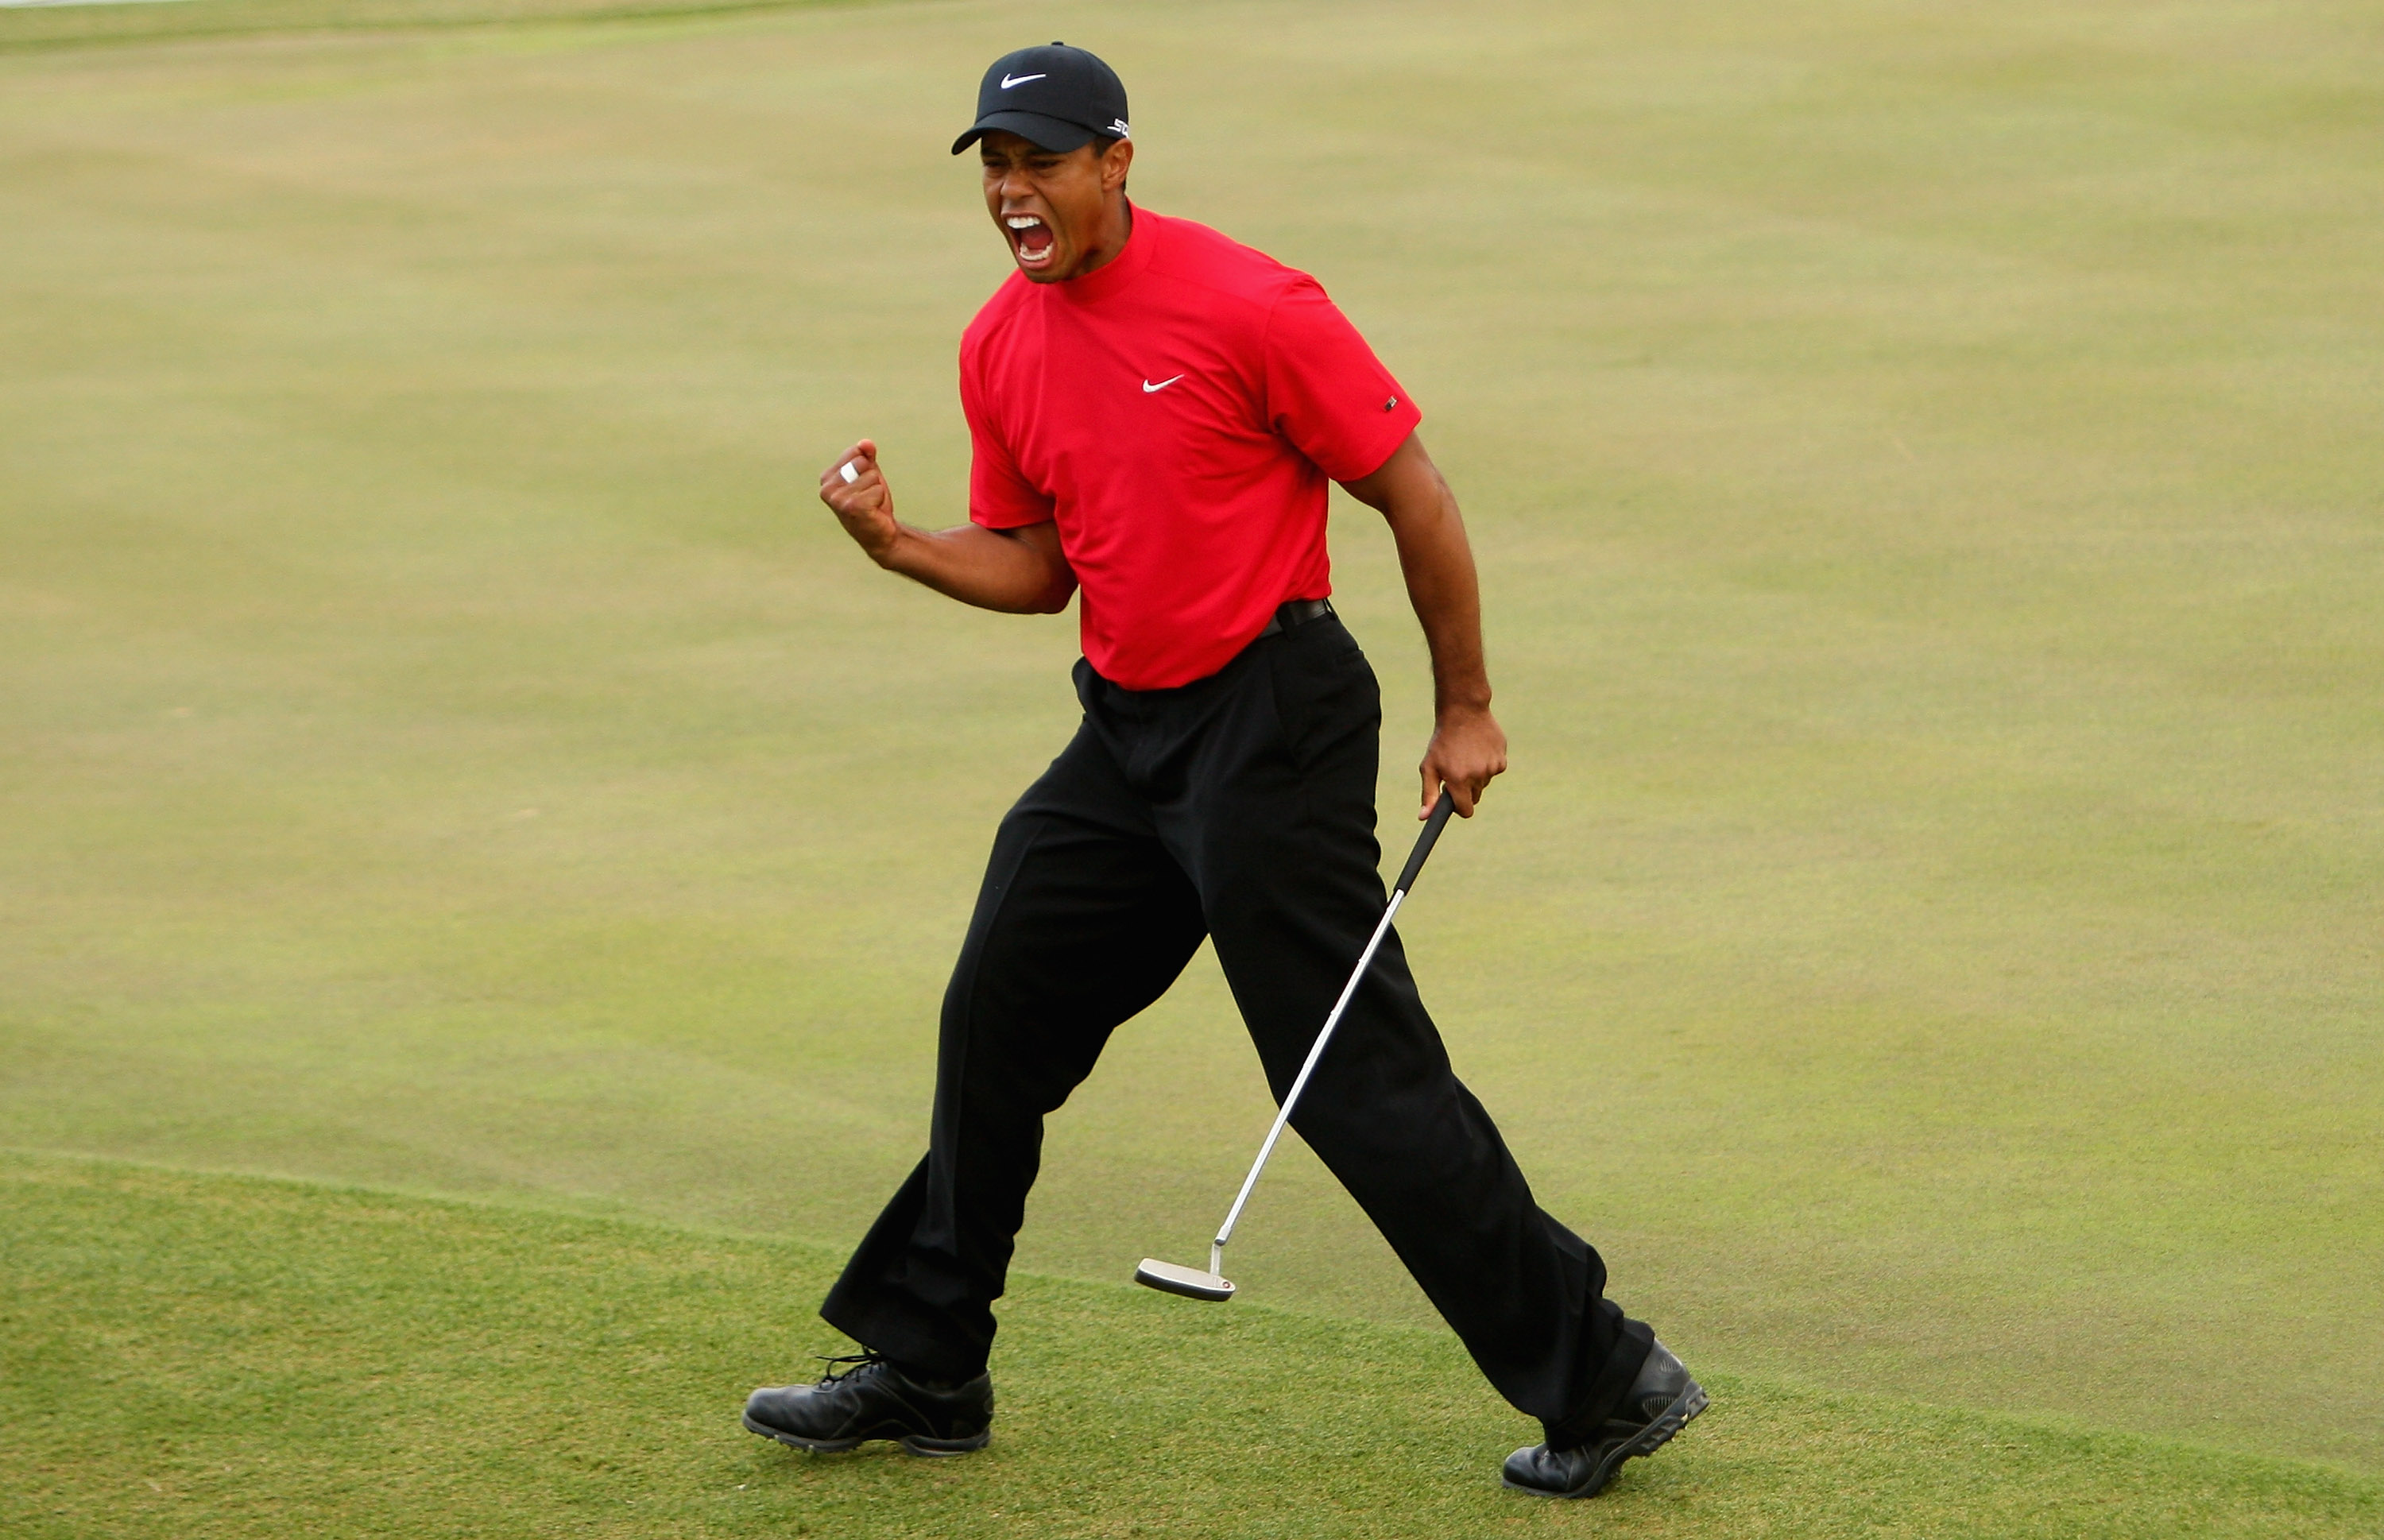 Tiger Woods made one of the Desert Classic's most memorable back nine charges on his way to victory in 2008